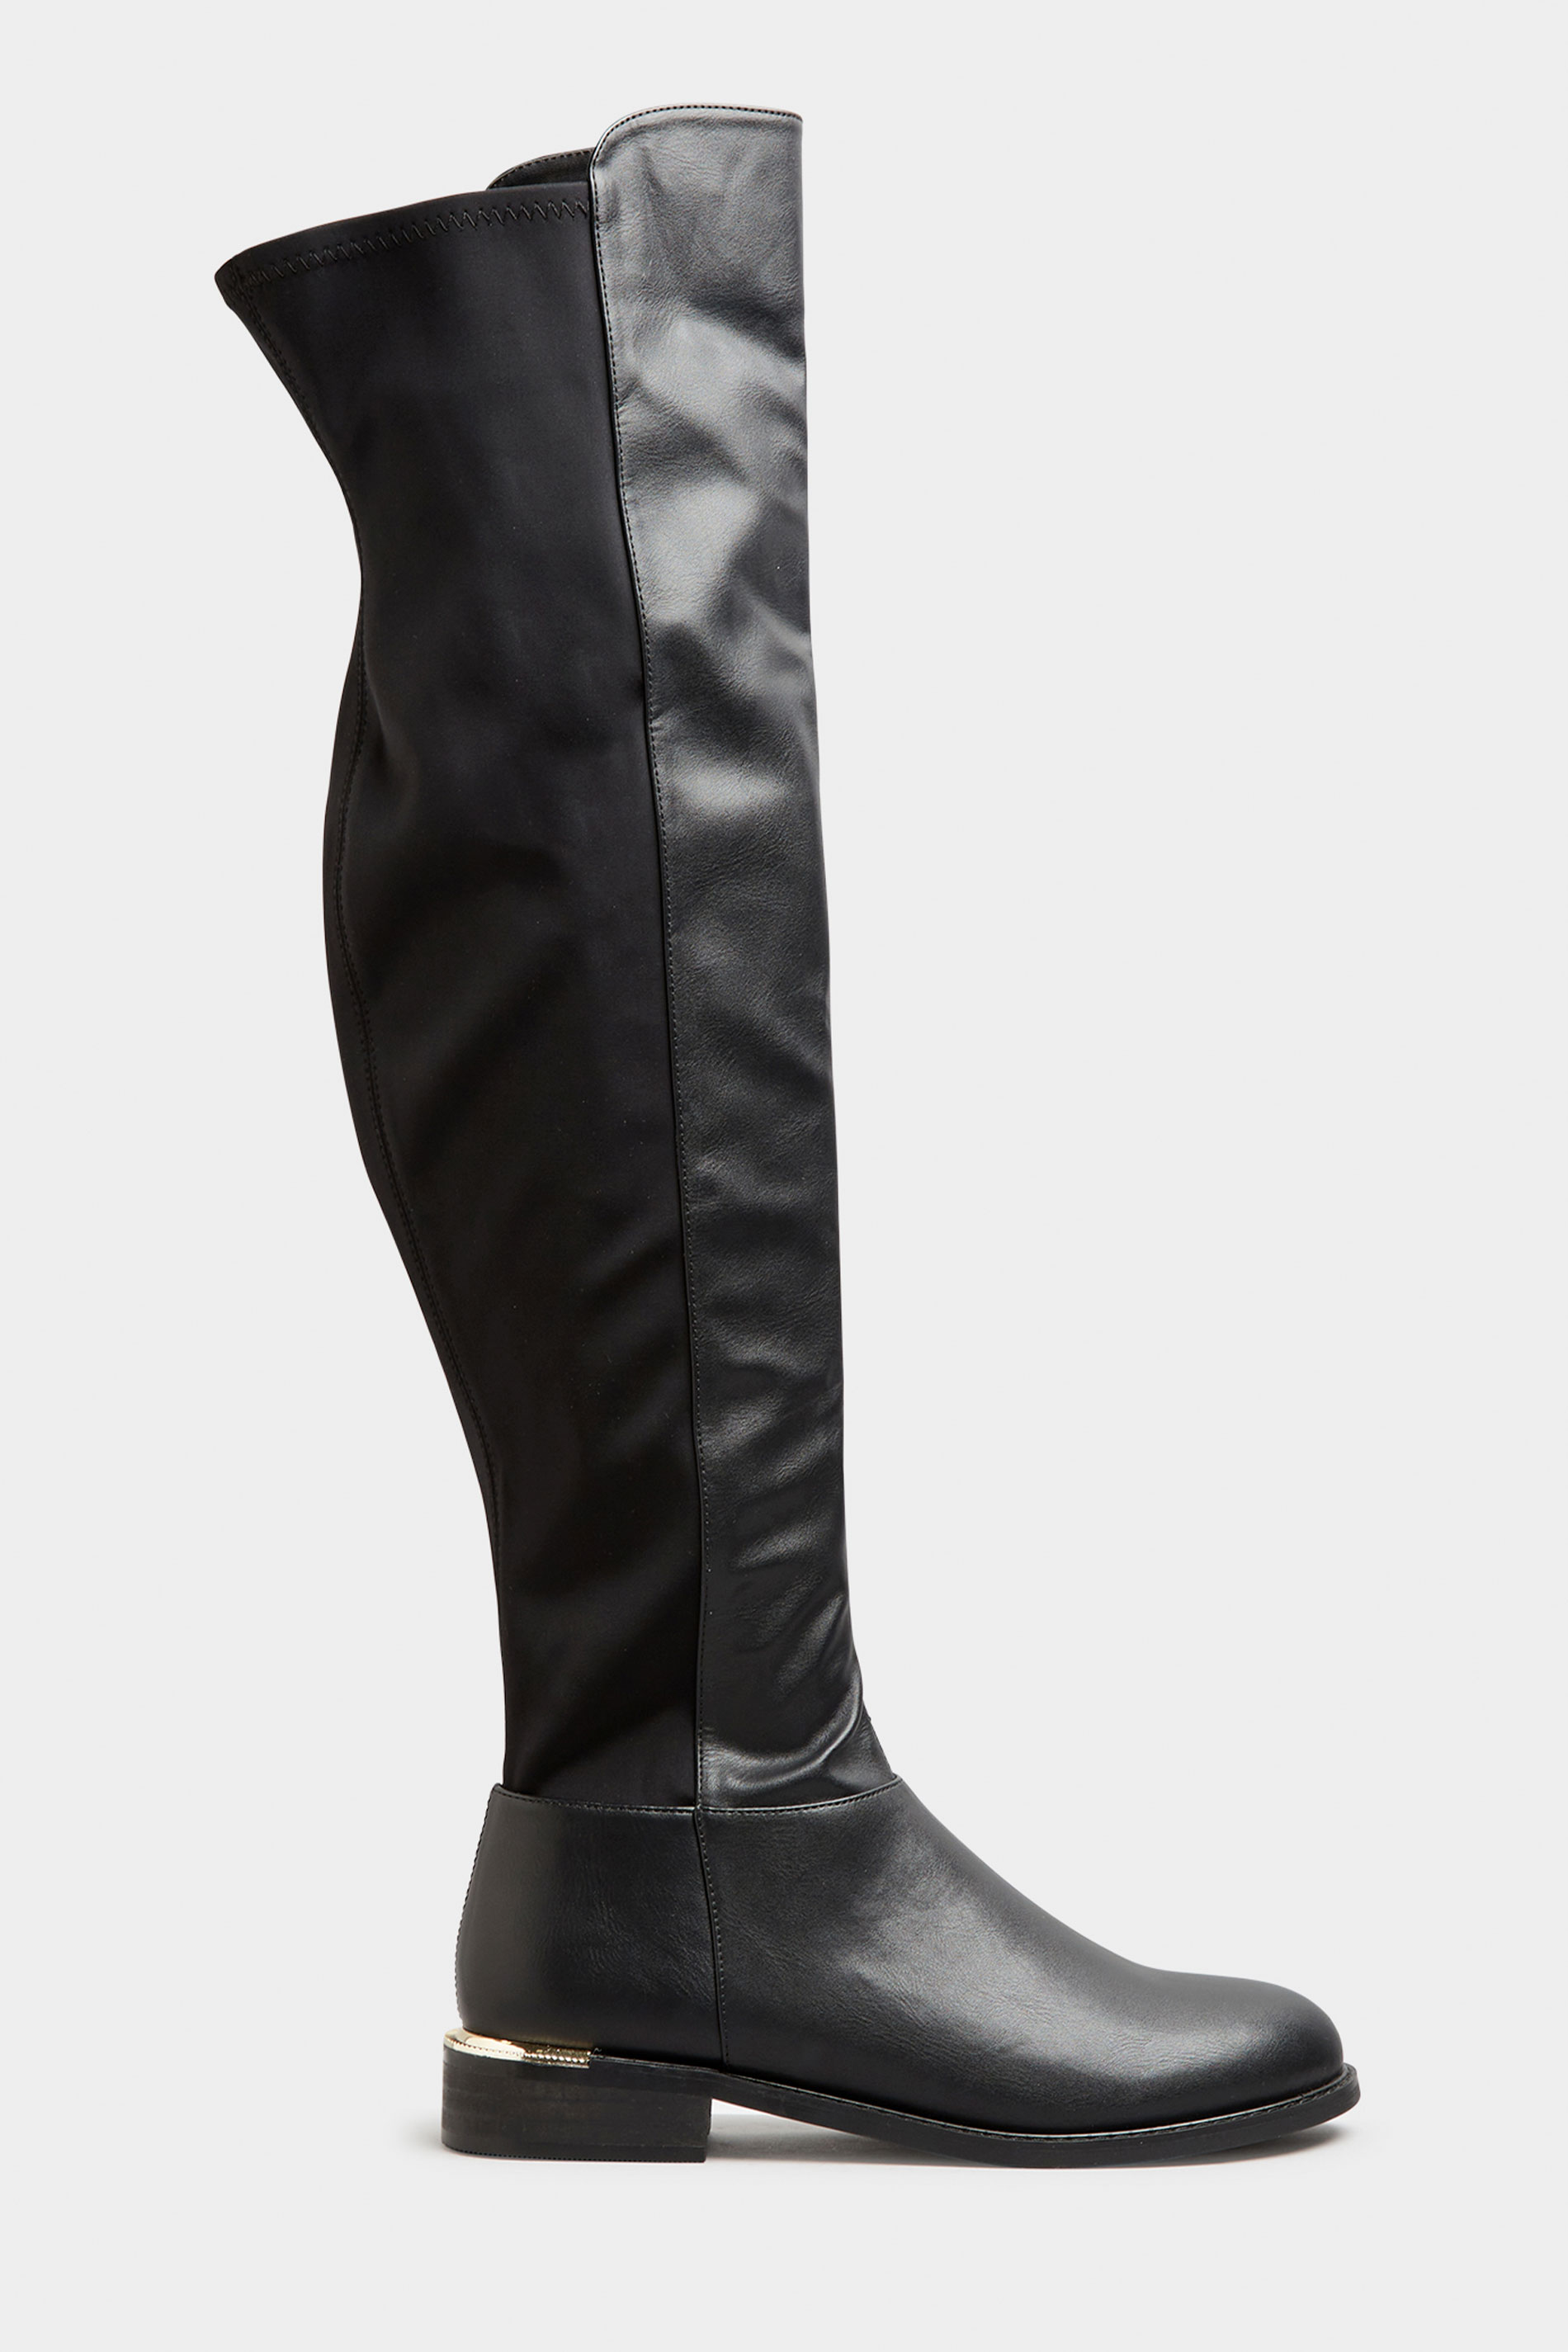 LTS Black Faux Leather Over The Knee Stretch Boots In Standard D Fit | Long Tall Sally 3